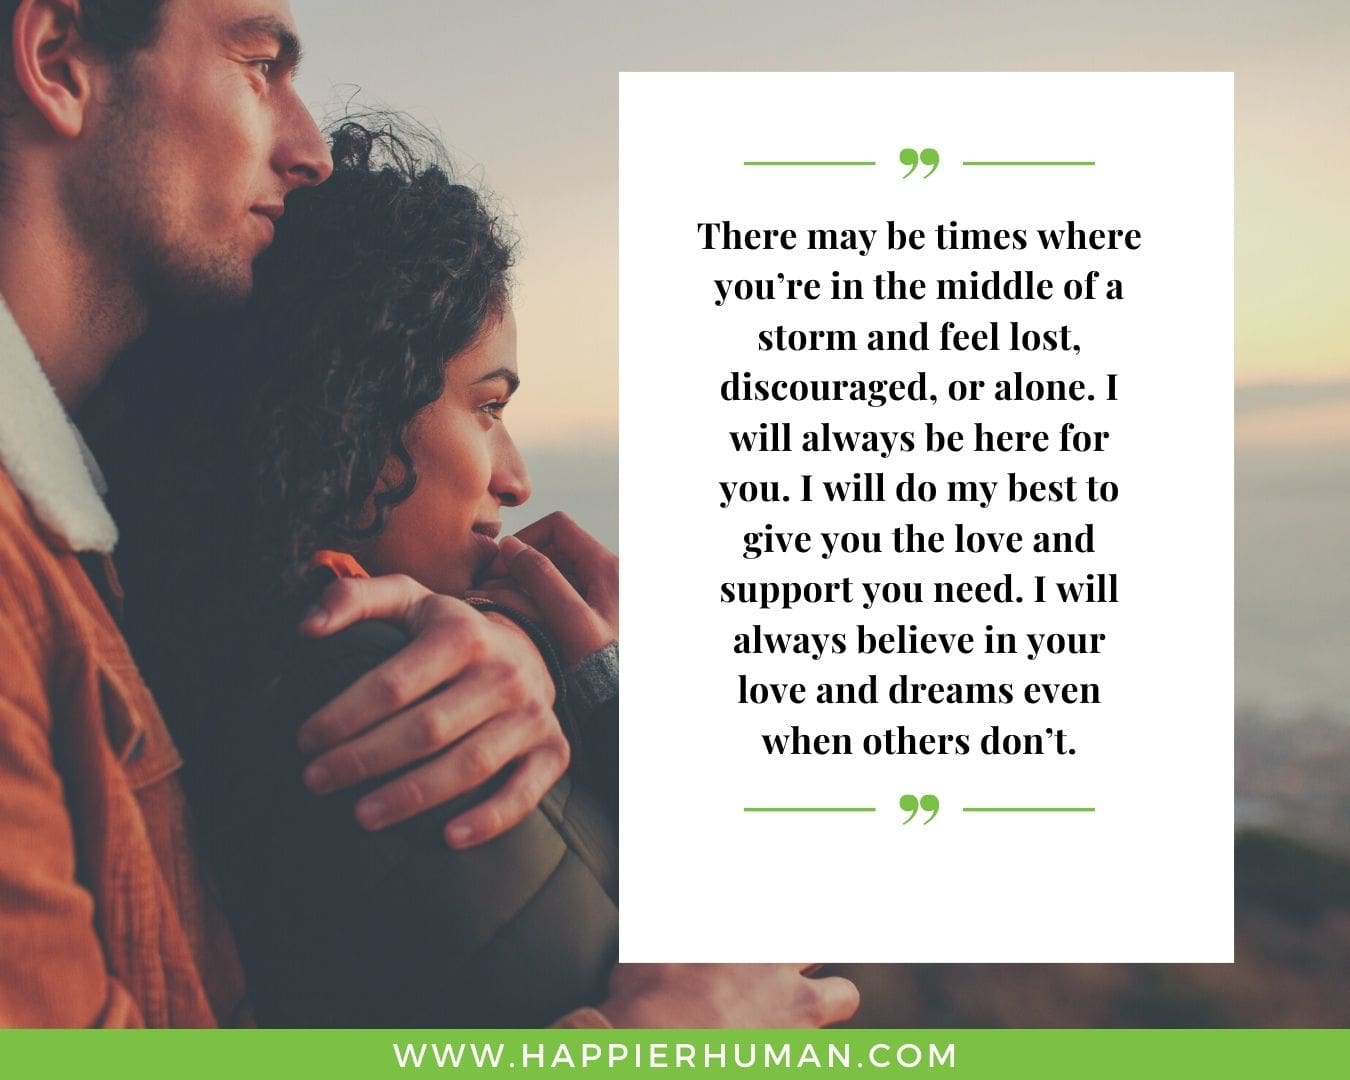 I’m Here for You Quotes - “There may be times where you’re in the middle of a storm and feel lost, discouraged, or alone. I will always be here for you. I will do my best to give you the love and support you need. I will always believe in your love and dreams even when others don’t.”